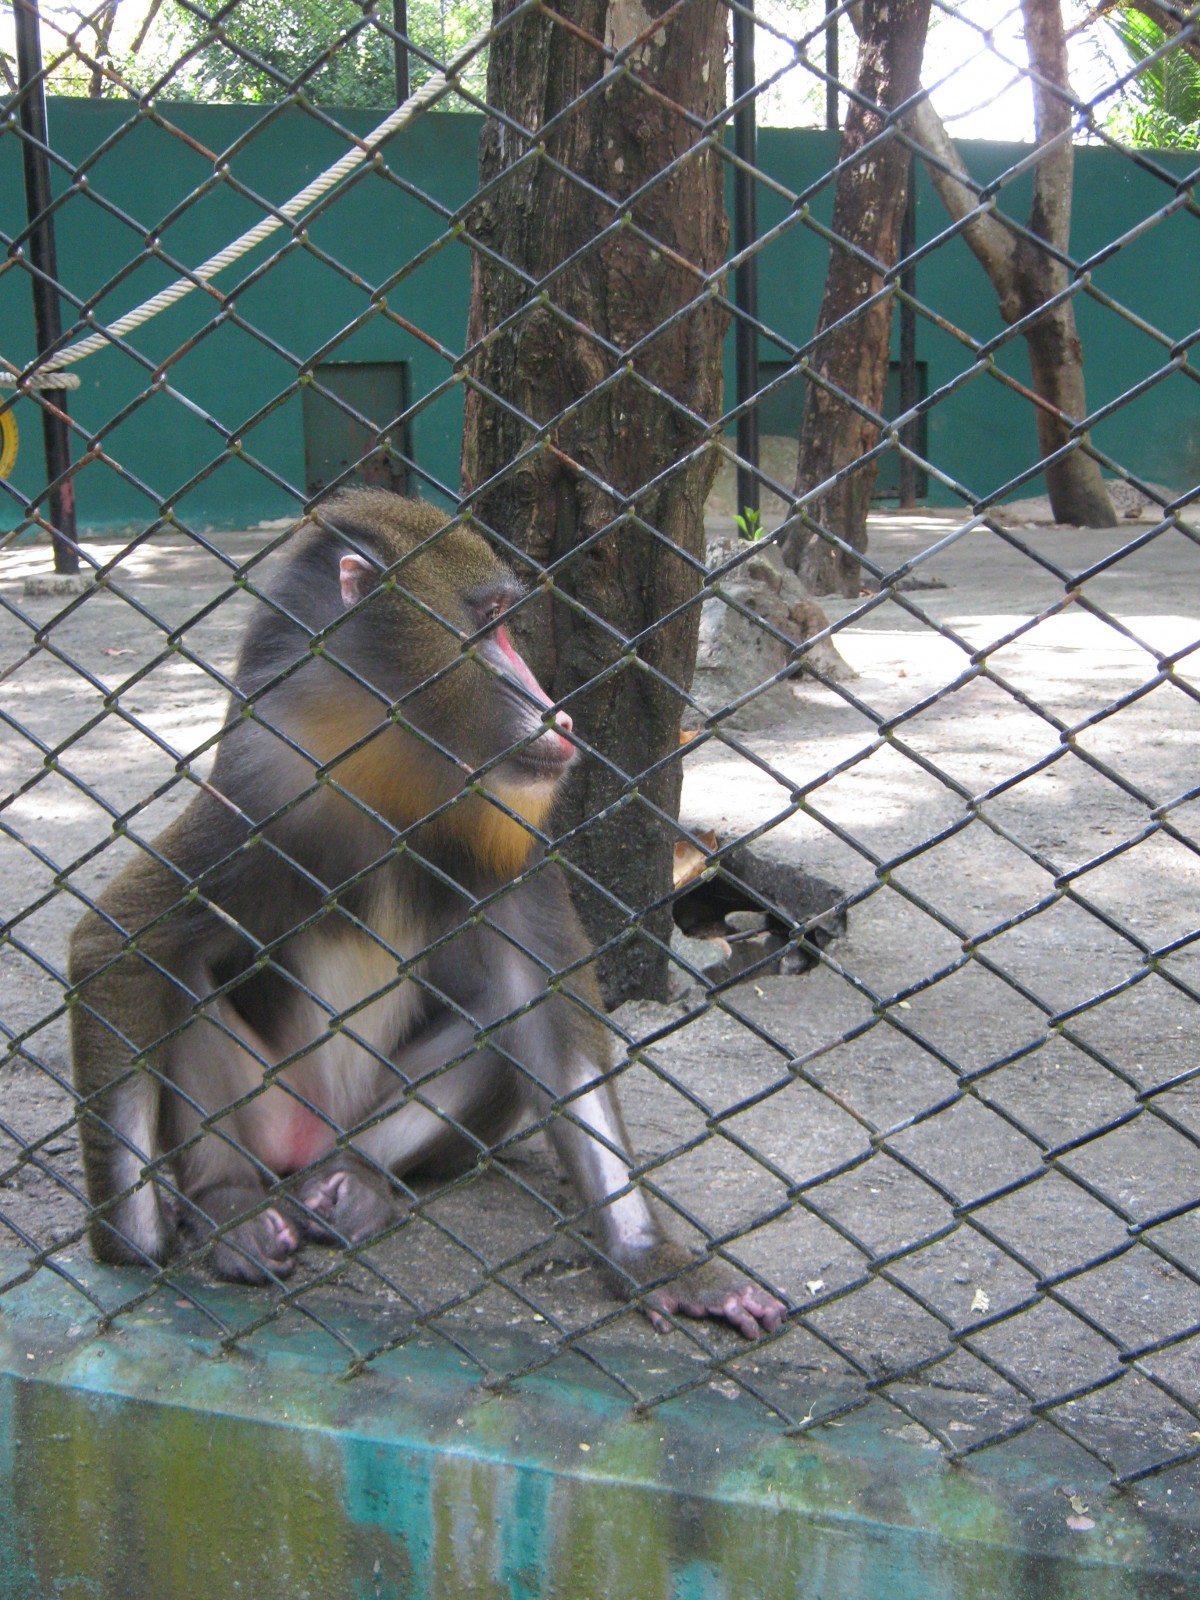 Monkey cages